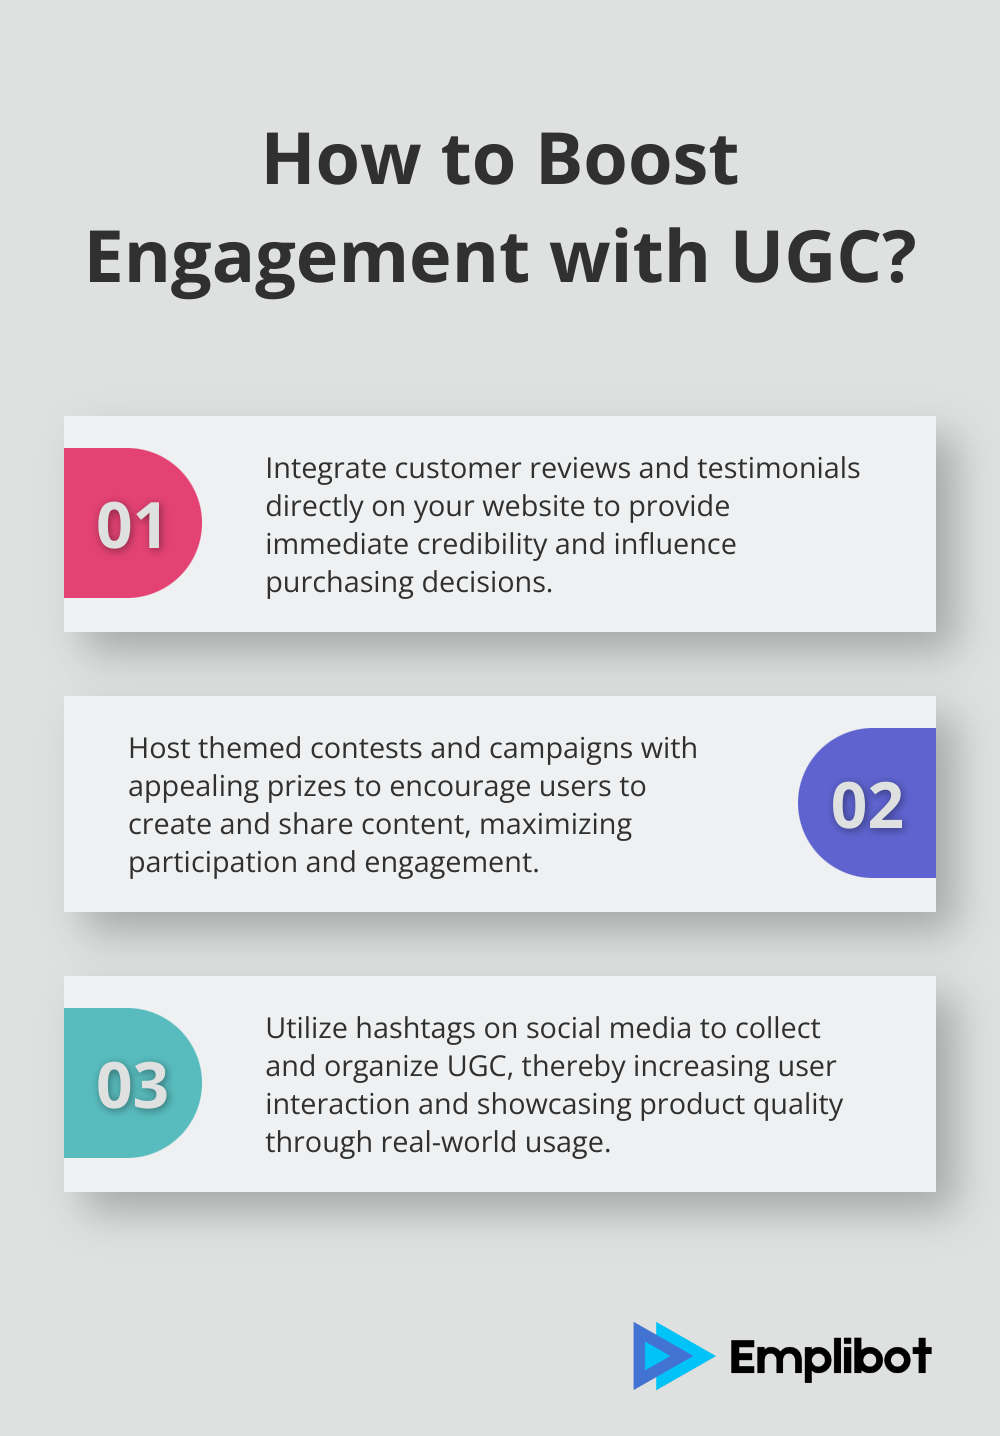 Fact - How to Boost Engagement with UGC?